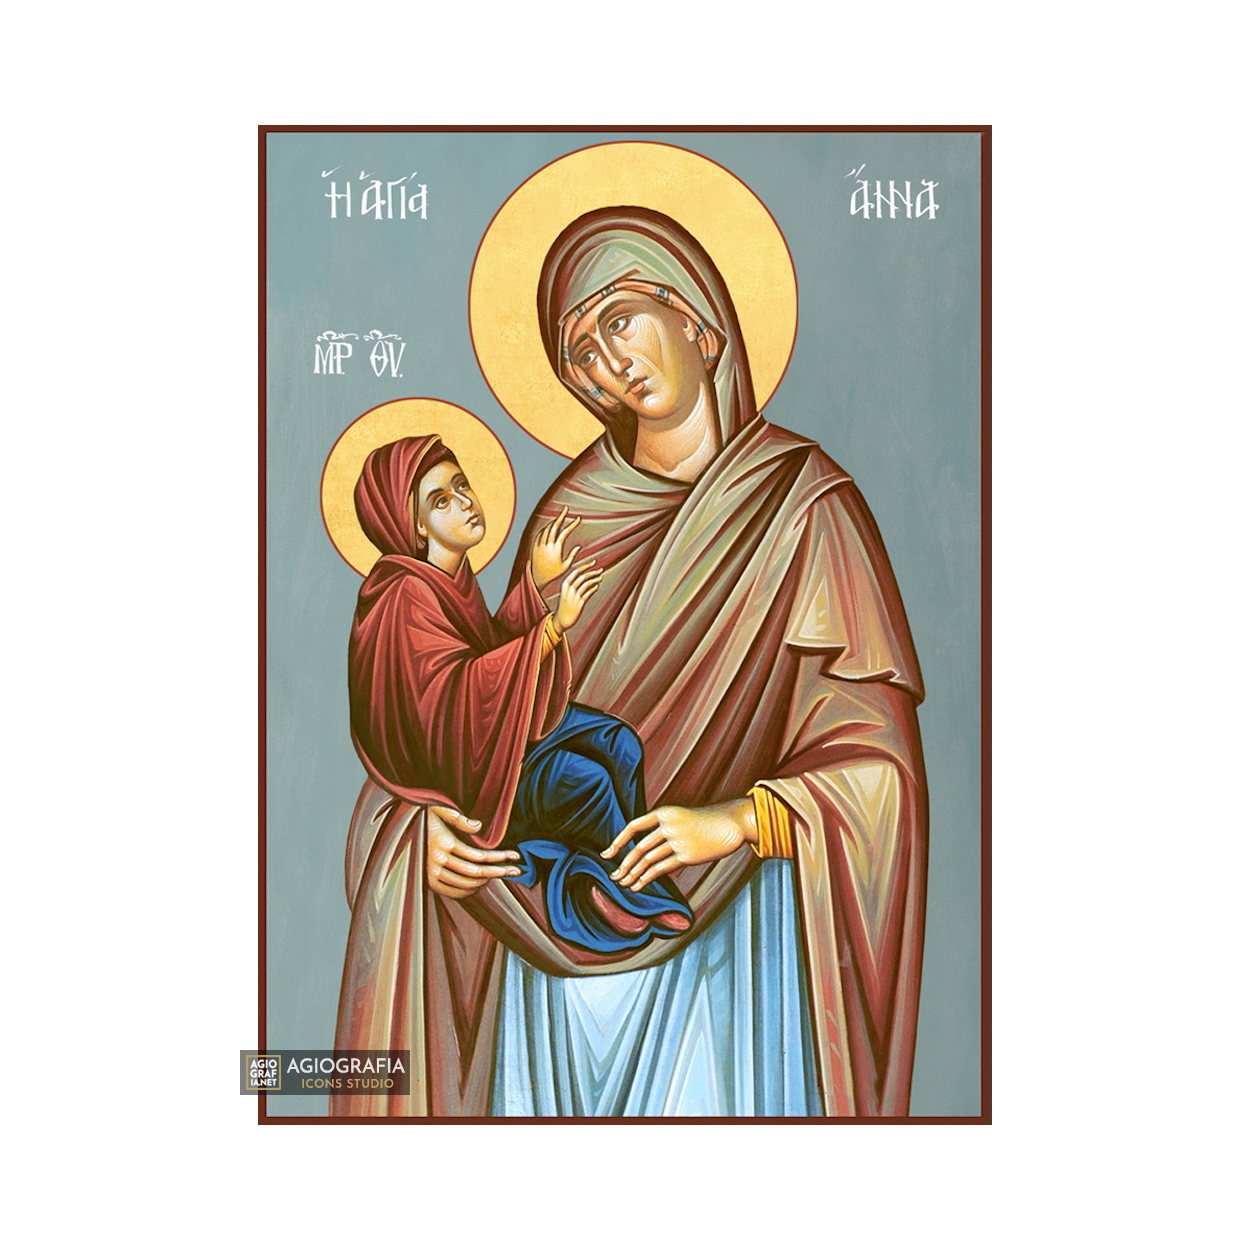 St Anna Christian Orthodox Wood Icon with Blue Background